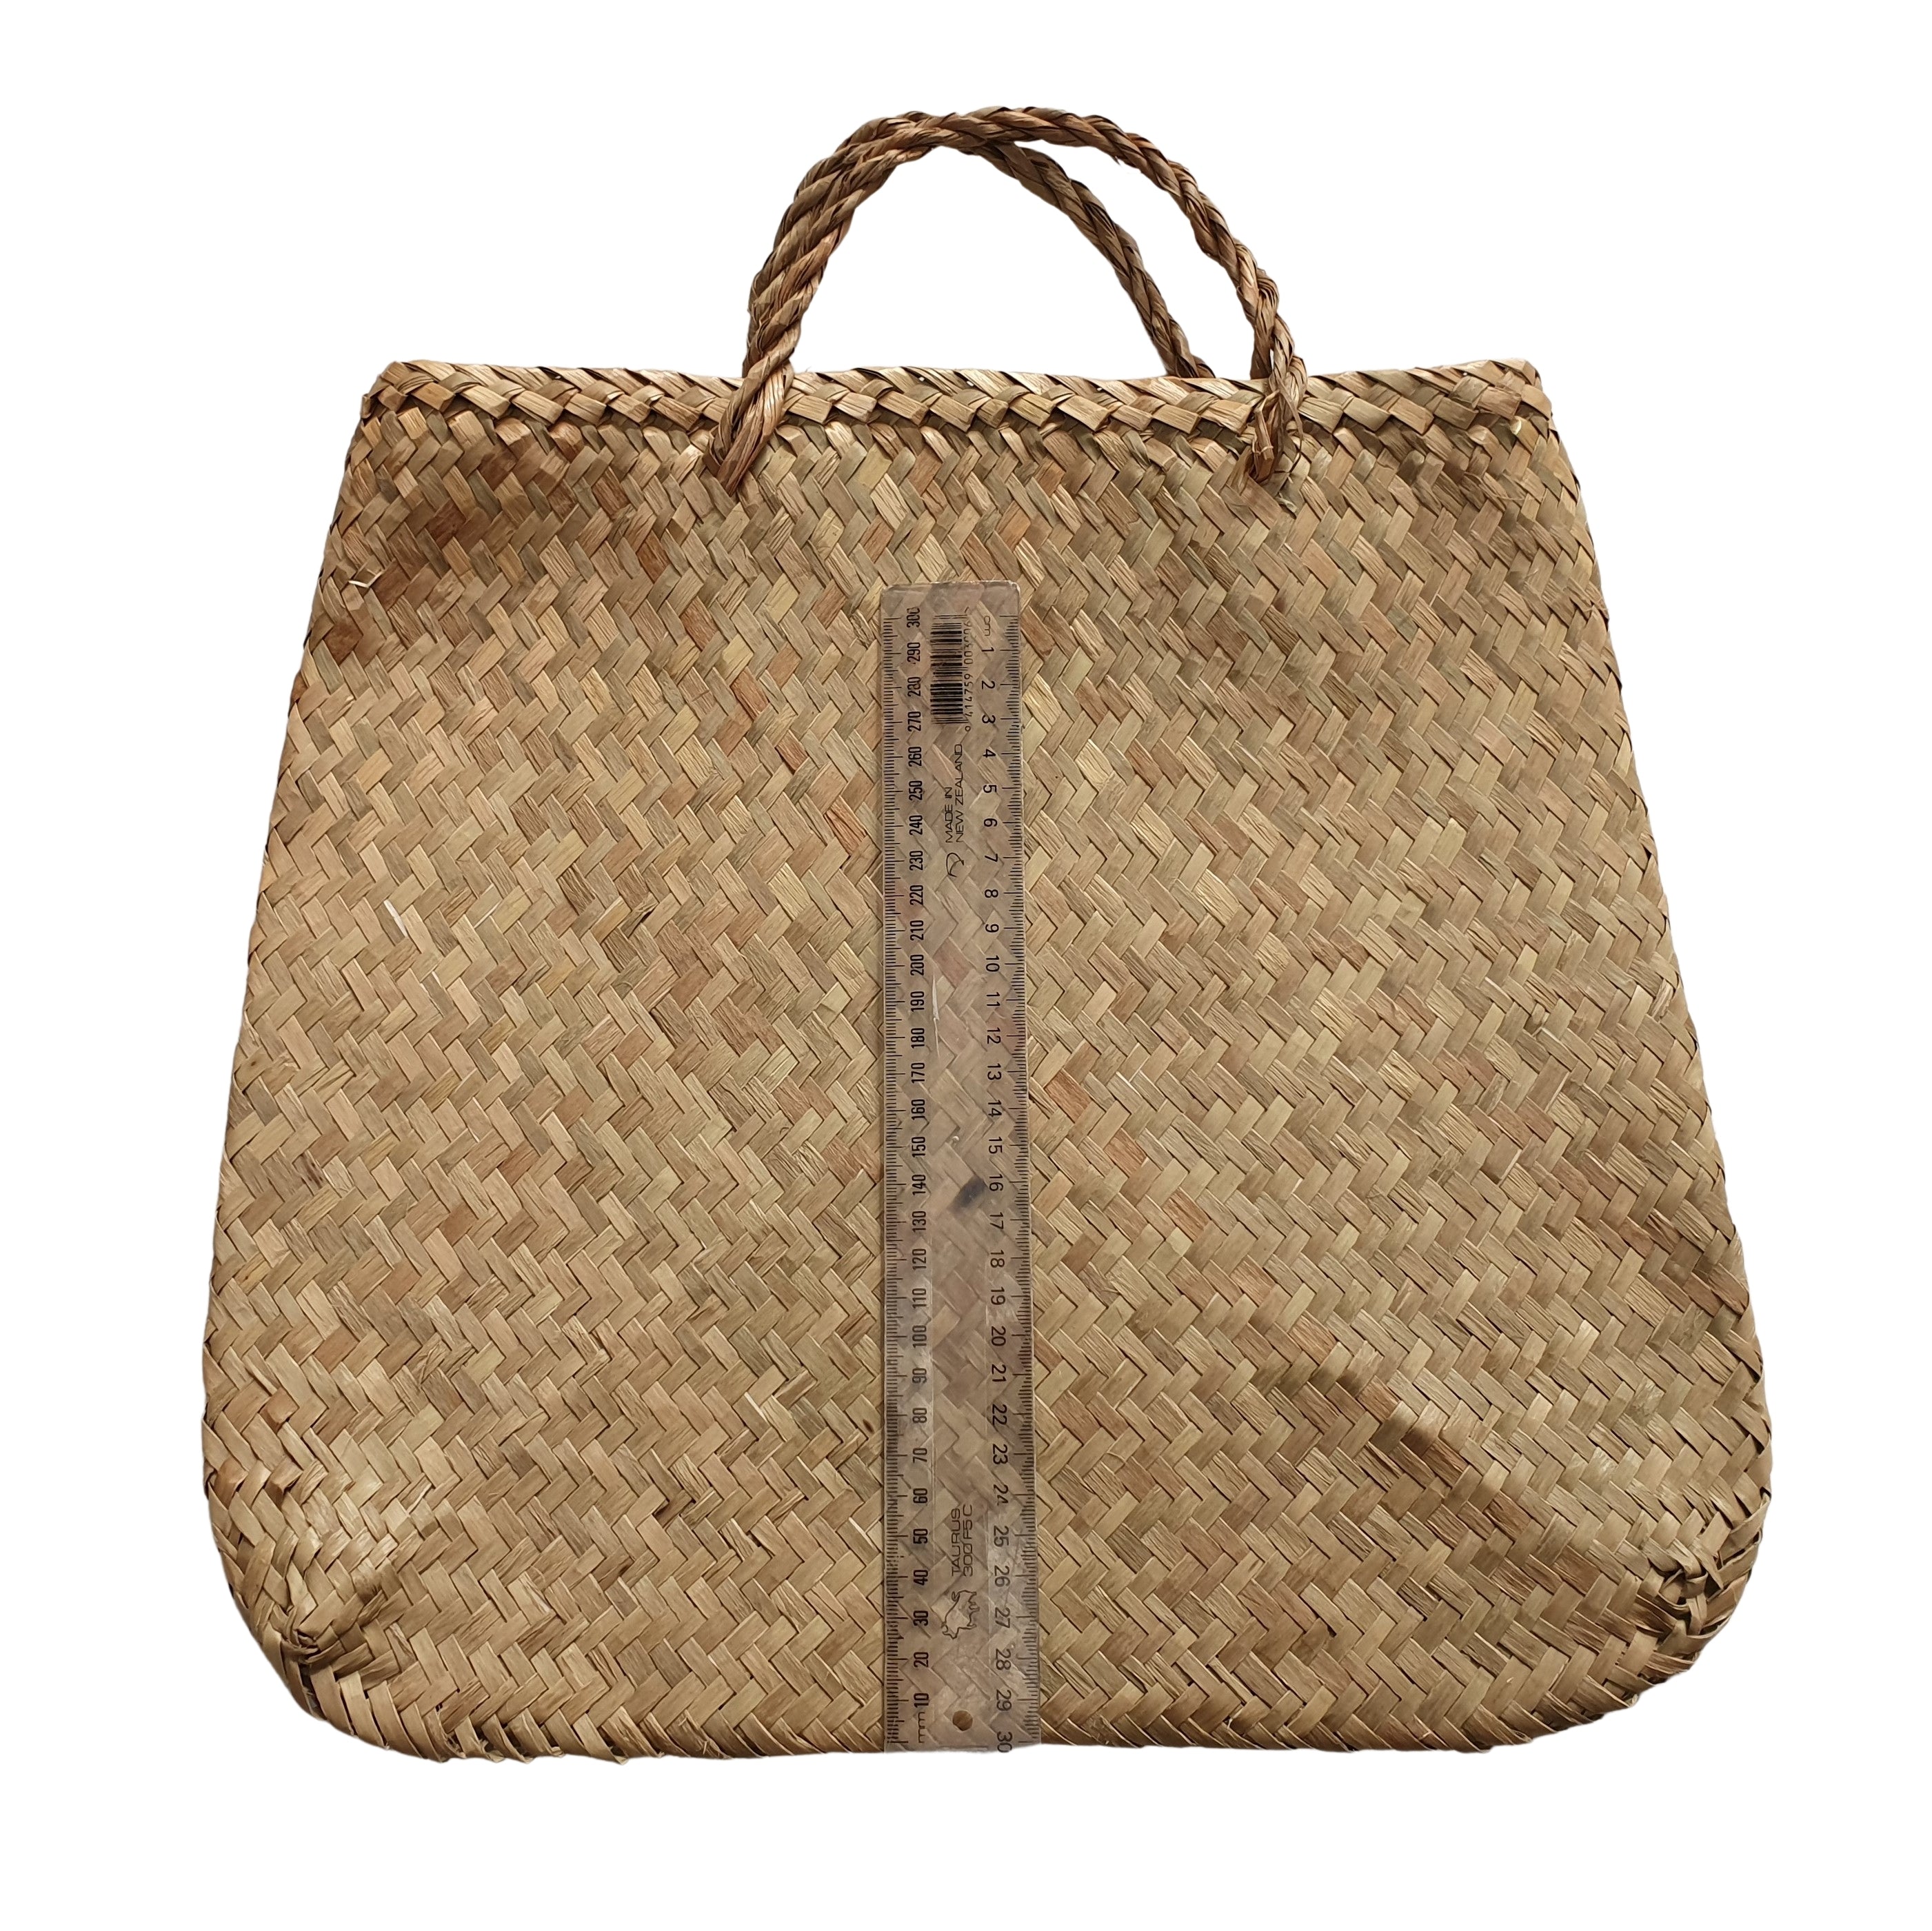 Woven Kete - Large and Medium